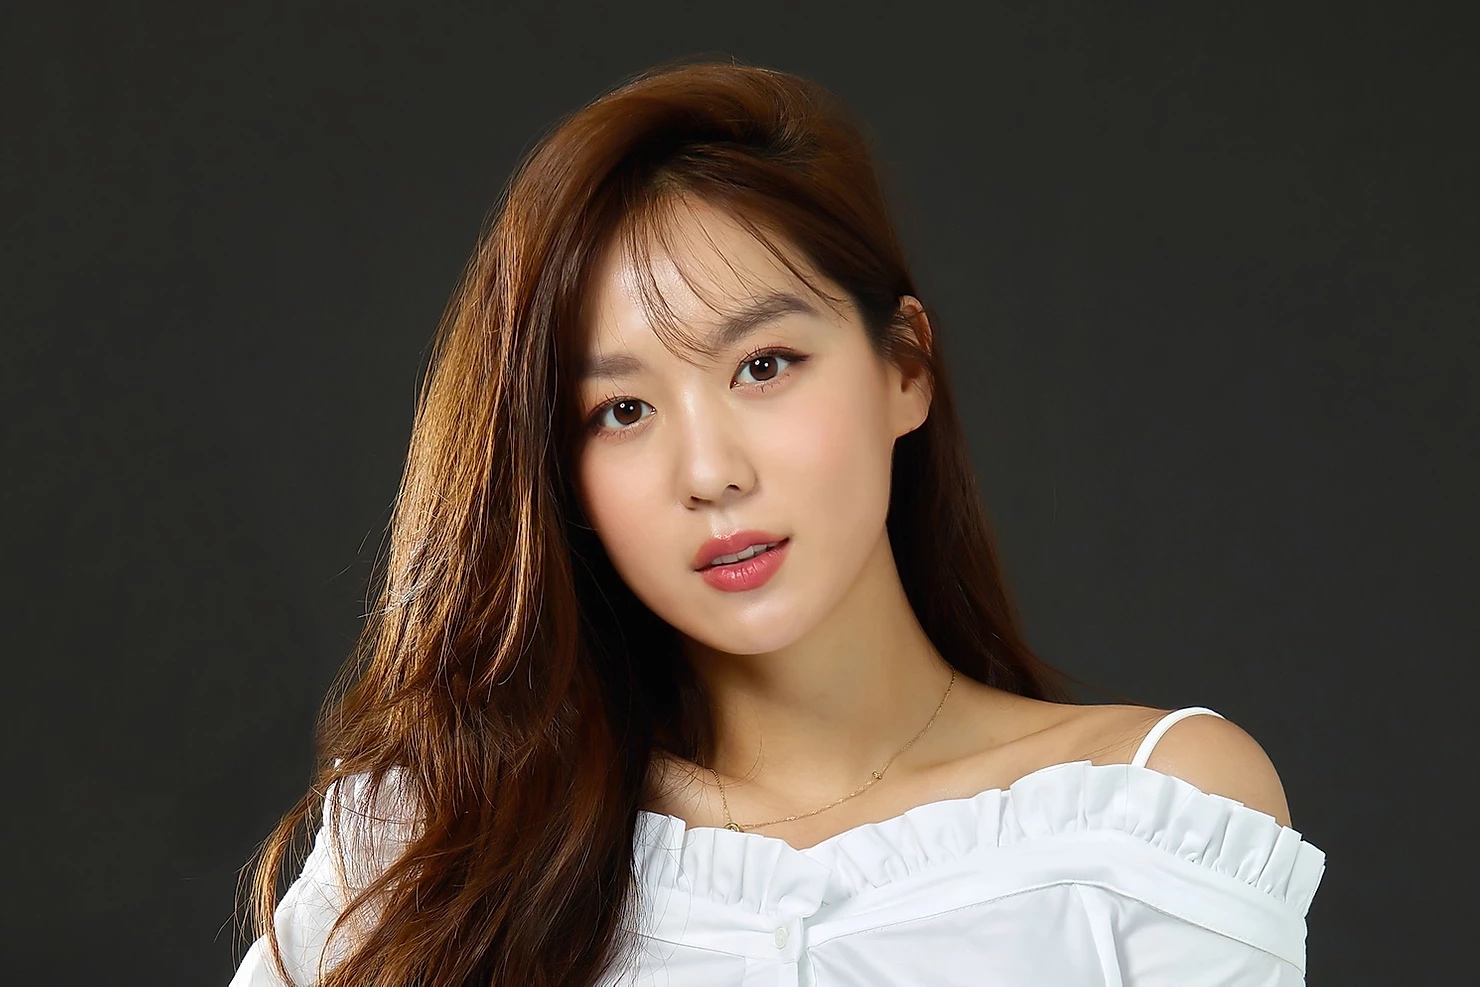 Kim Hee Jung (South Korean Actress) - Age, Height, Net Worth, Biography, Movies, Family